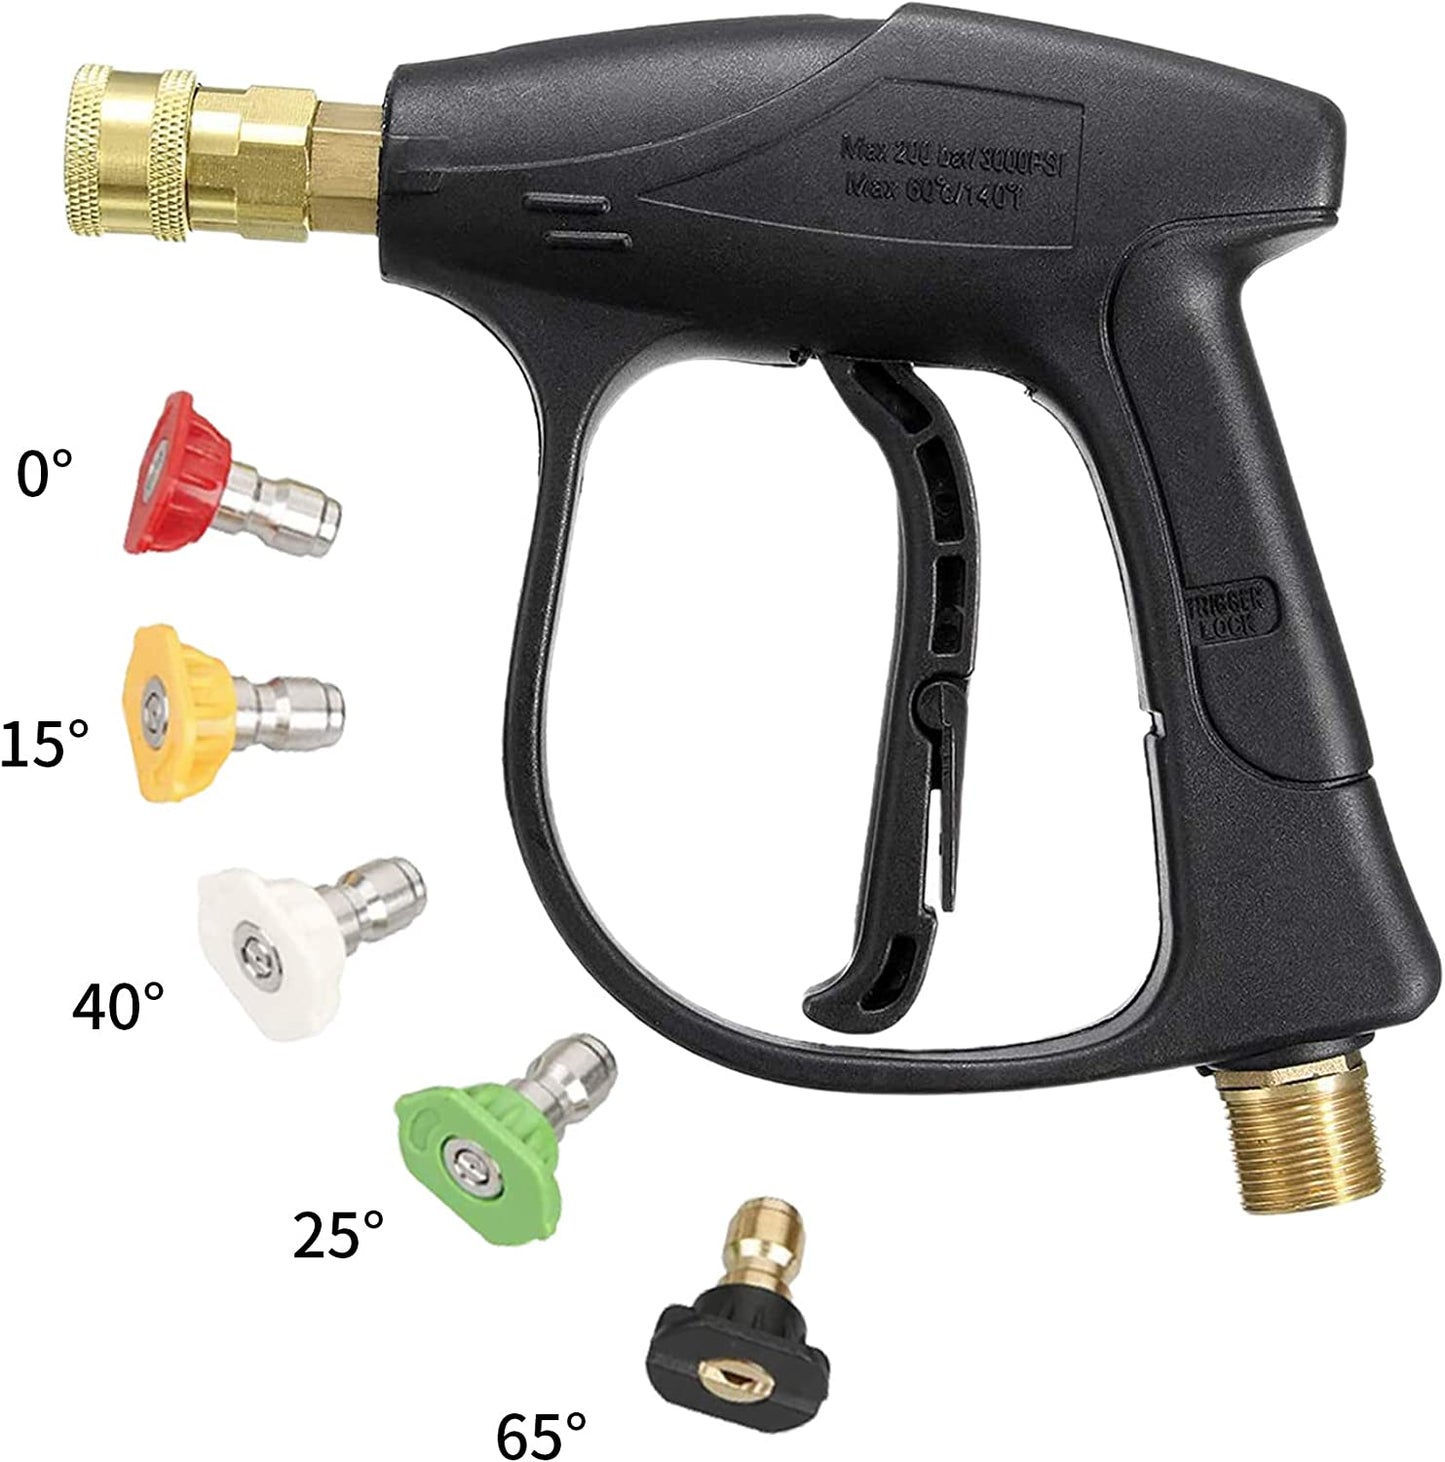 High Pressure Washer Gun, 3000 PSI Car Washer Gun with 5 Color Quick Connect Nozzles for Car Pressure Power Washers M22 Hose Connector 3.0 TIP